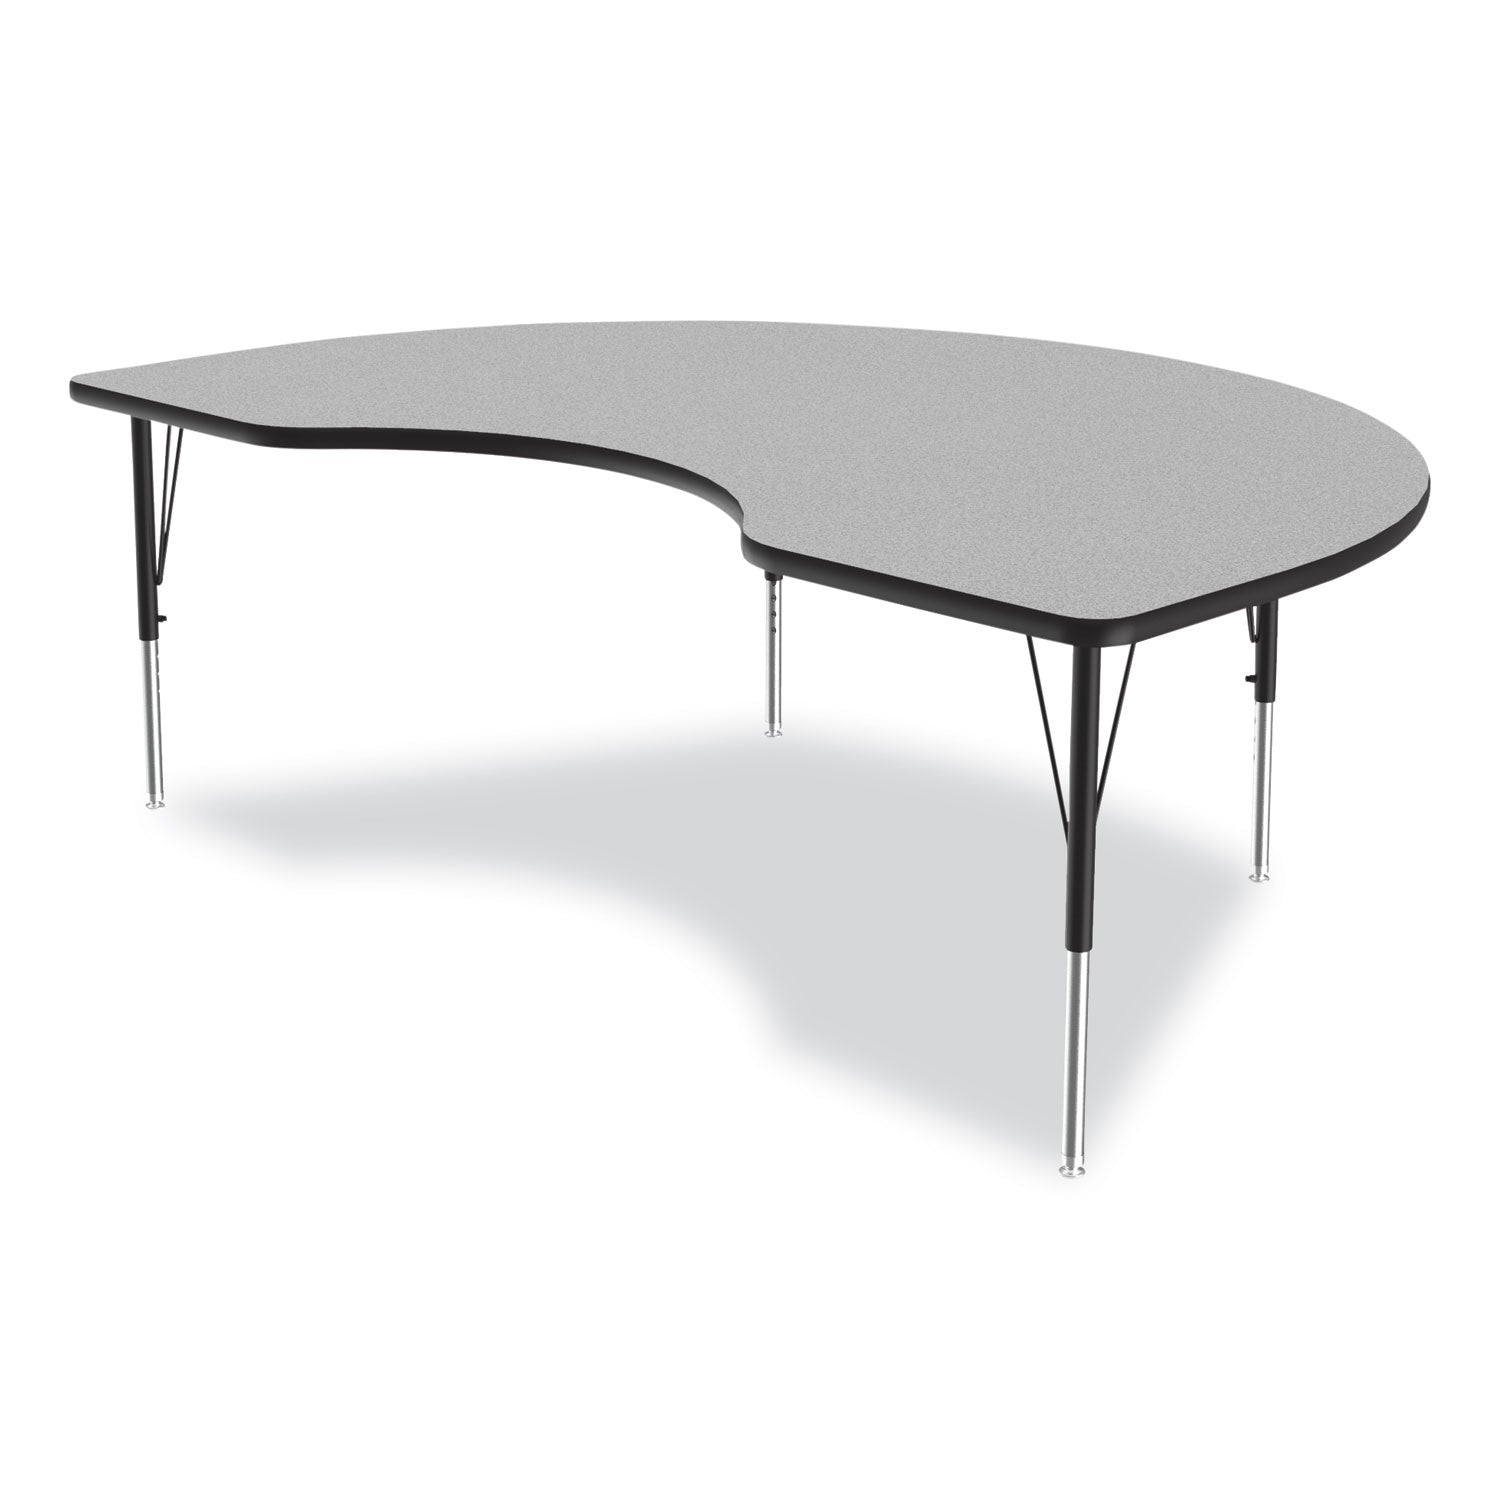 adjustable-activity-tables-kidney-shaped-72-x-48-x-19-to-29-gray-top-black-legs-4-pallet-ships-in-4-6-business-days_crl4872tf1595k4 - 5